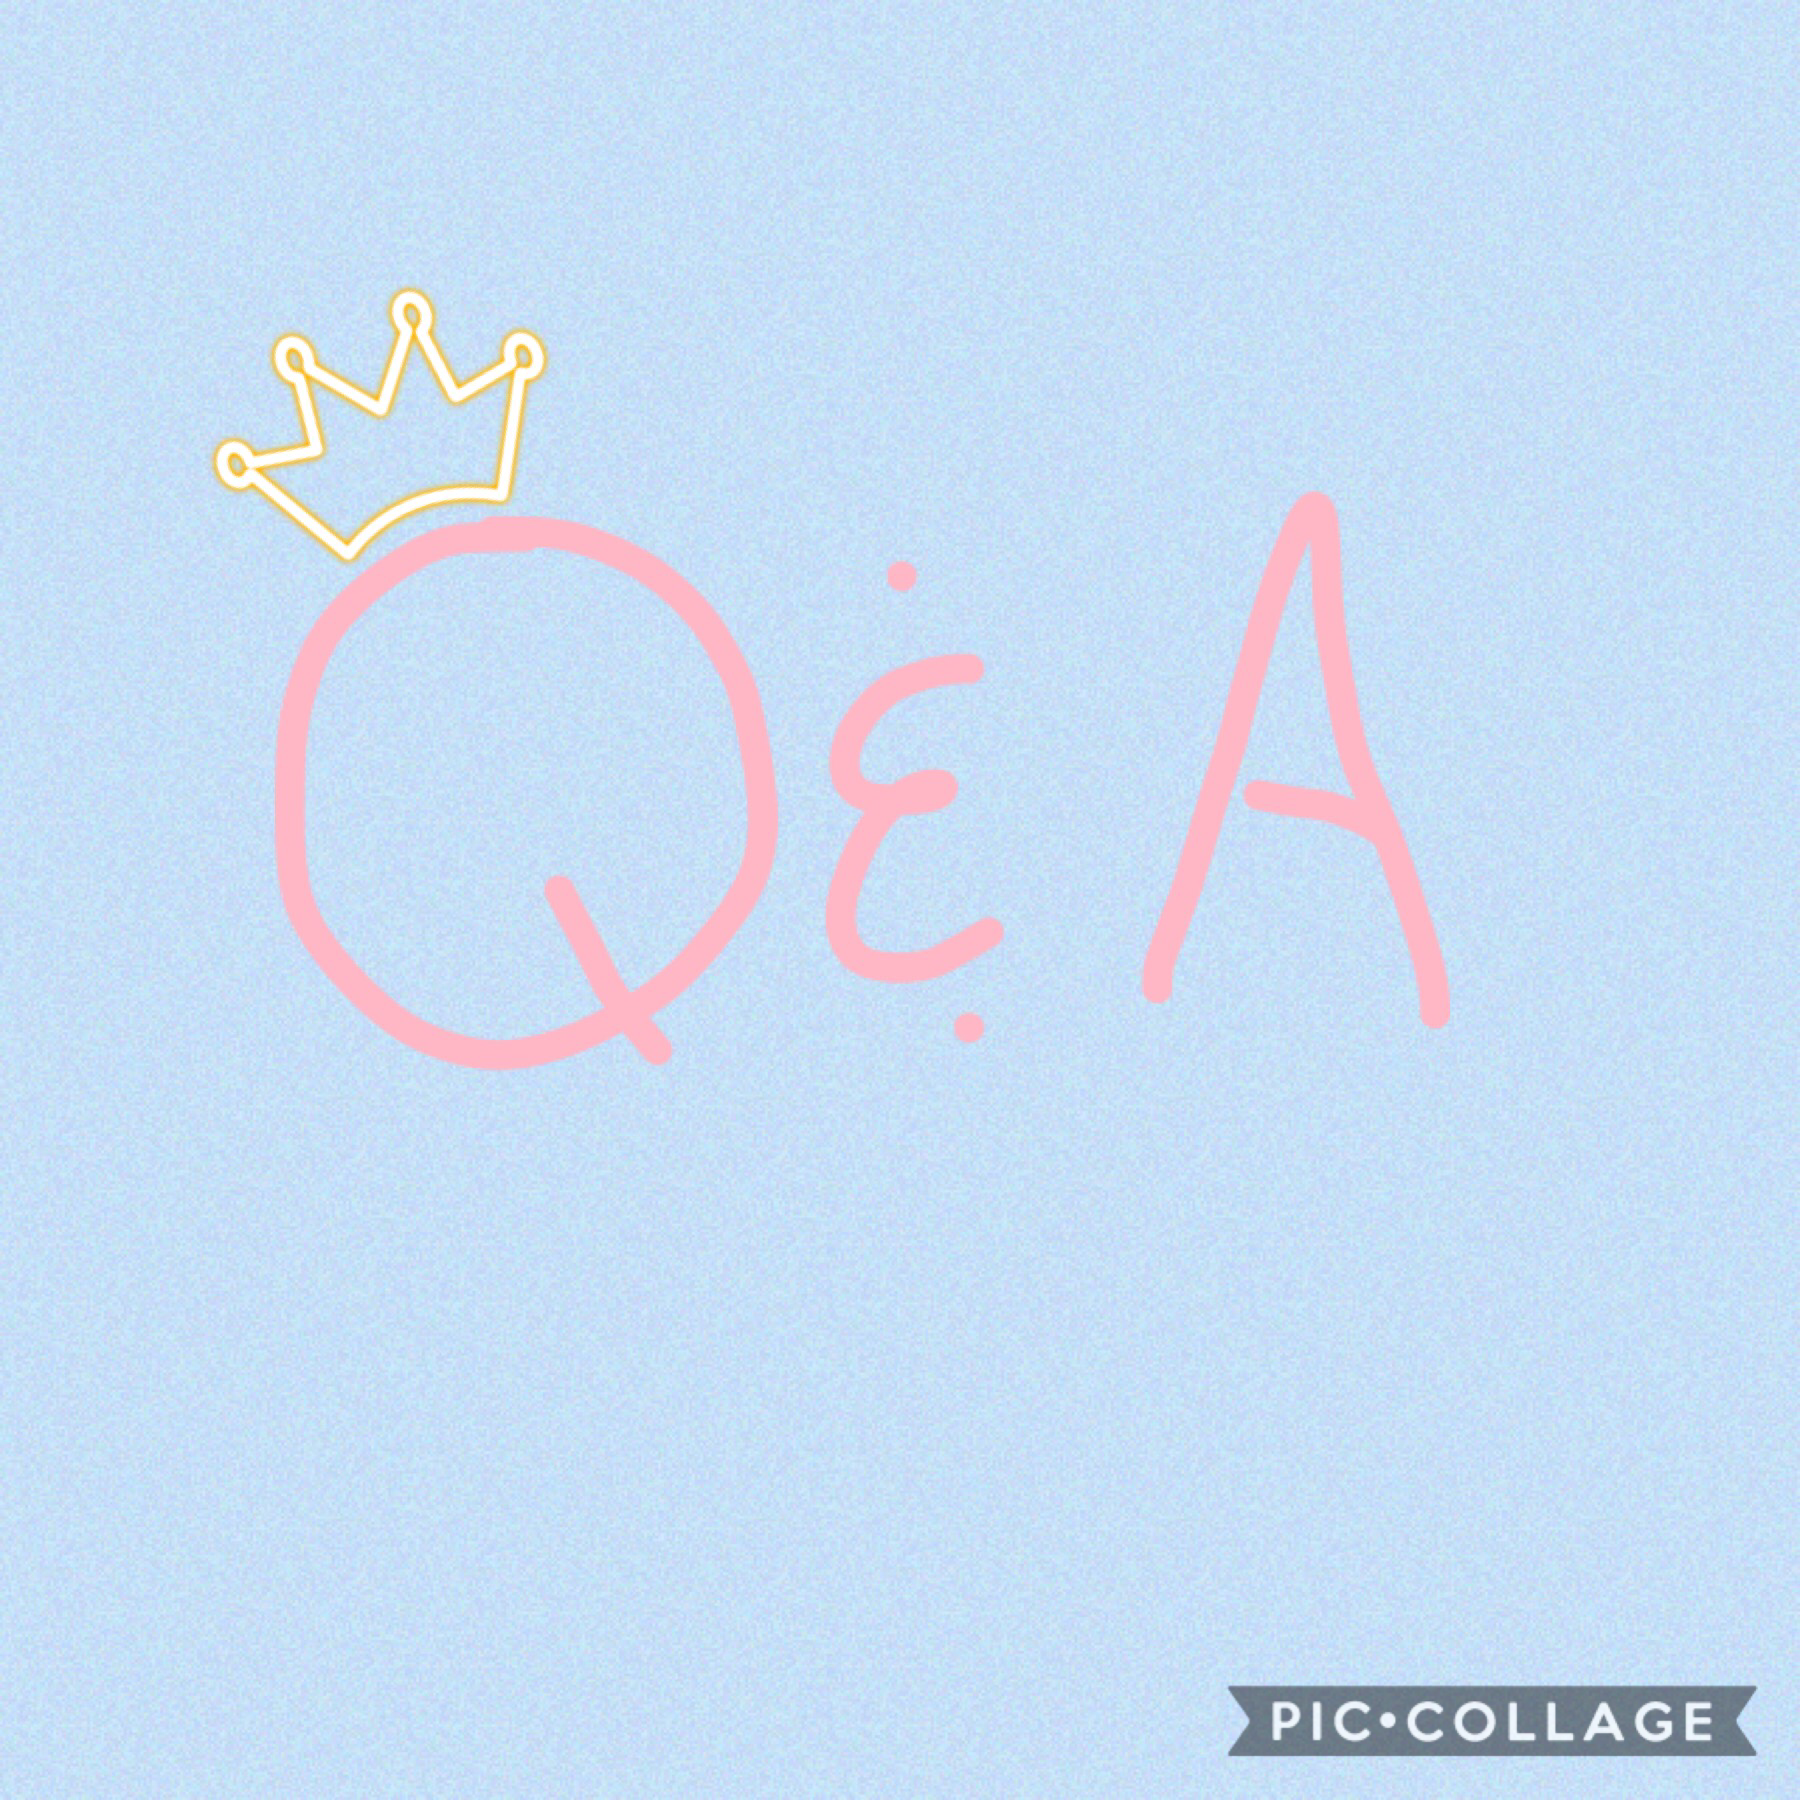 Ask pretty much anything.💕 
Nothing about where I live or how old I am etc. 
How are you guys? We haven’t talked in awhile since I’ve started school. Maybe this will be a good way to talk😊 Love you, Peace✌🏻